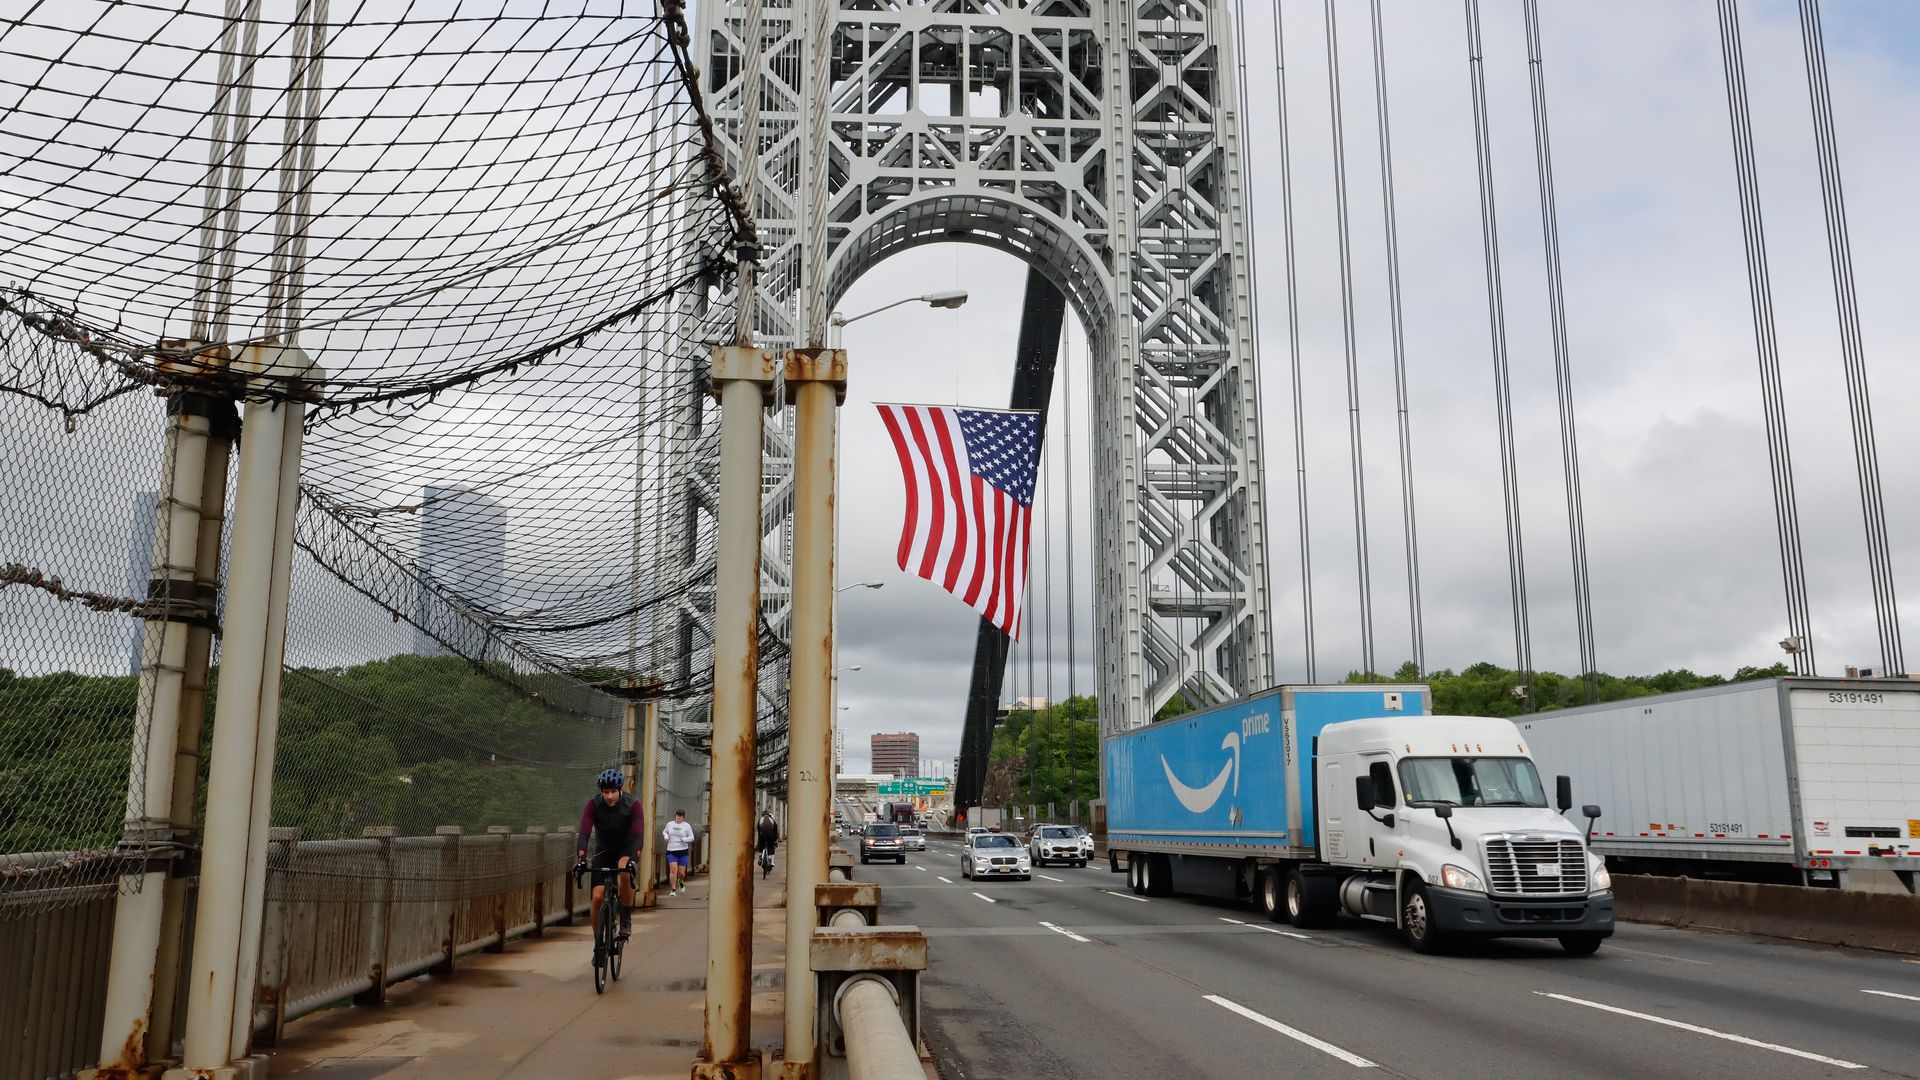 The George Washington Bridge hangs its 60 x 90-foot American flag from the New Jersey side tower to mark Memorial Day as an Amazon truck heads to New York City on May 31, 2021 in Ft. Lee, New Jersey. 